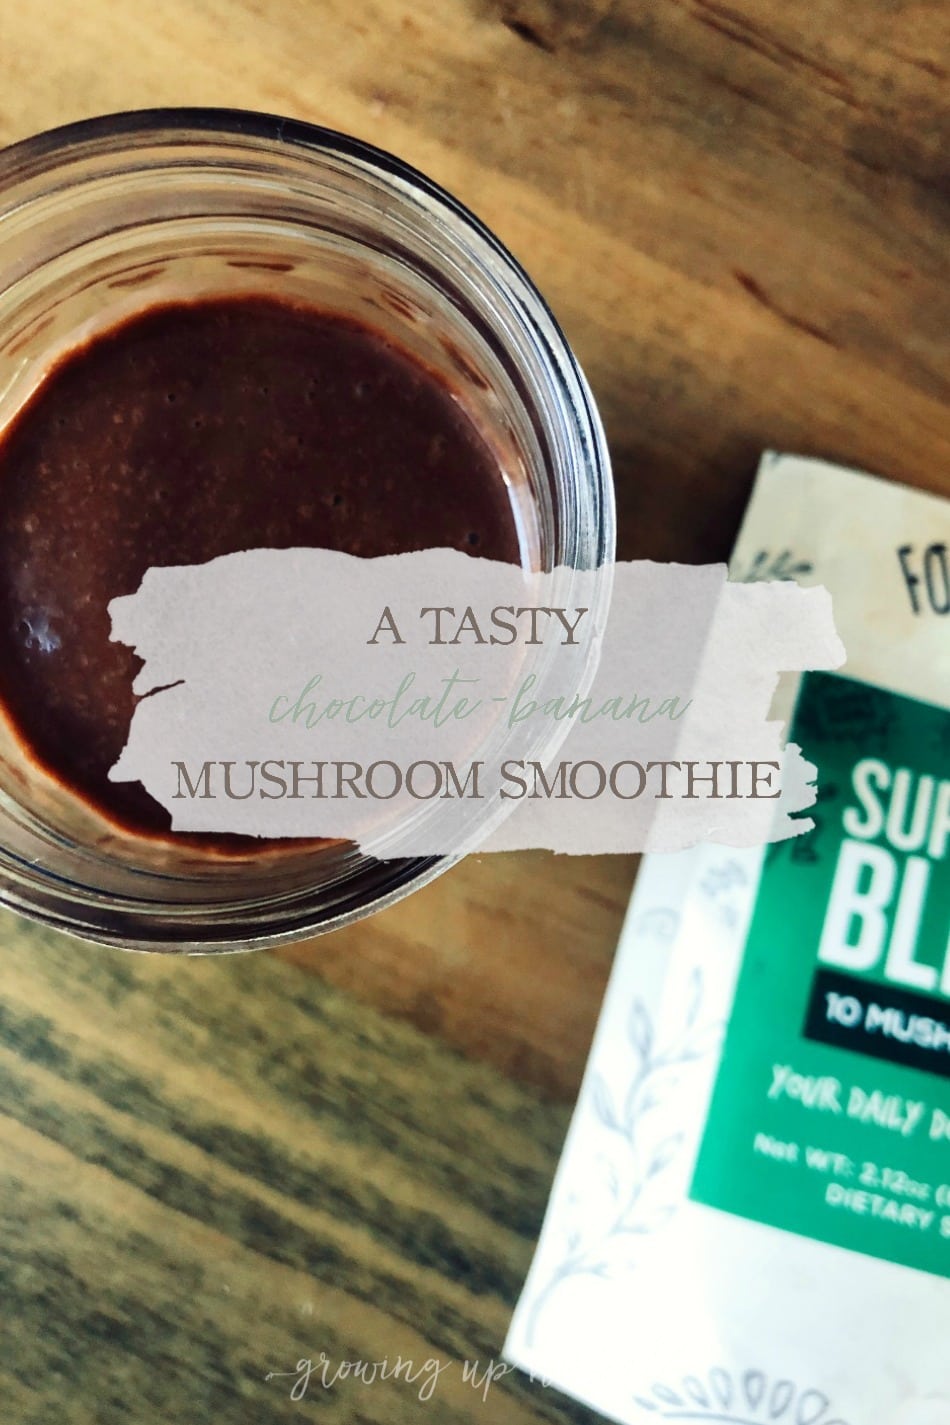 A Tasty Chocolate-Banana Mushroom Smoothie | Growing Up Herbal | Tasty, nutritious, full of antioxidants, and supportive to your immune system—this chocolate-banana mushroom smoothie will soon be a family favorite!